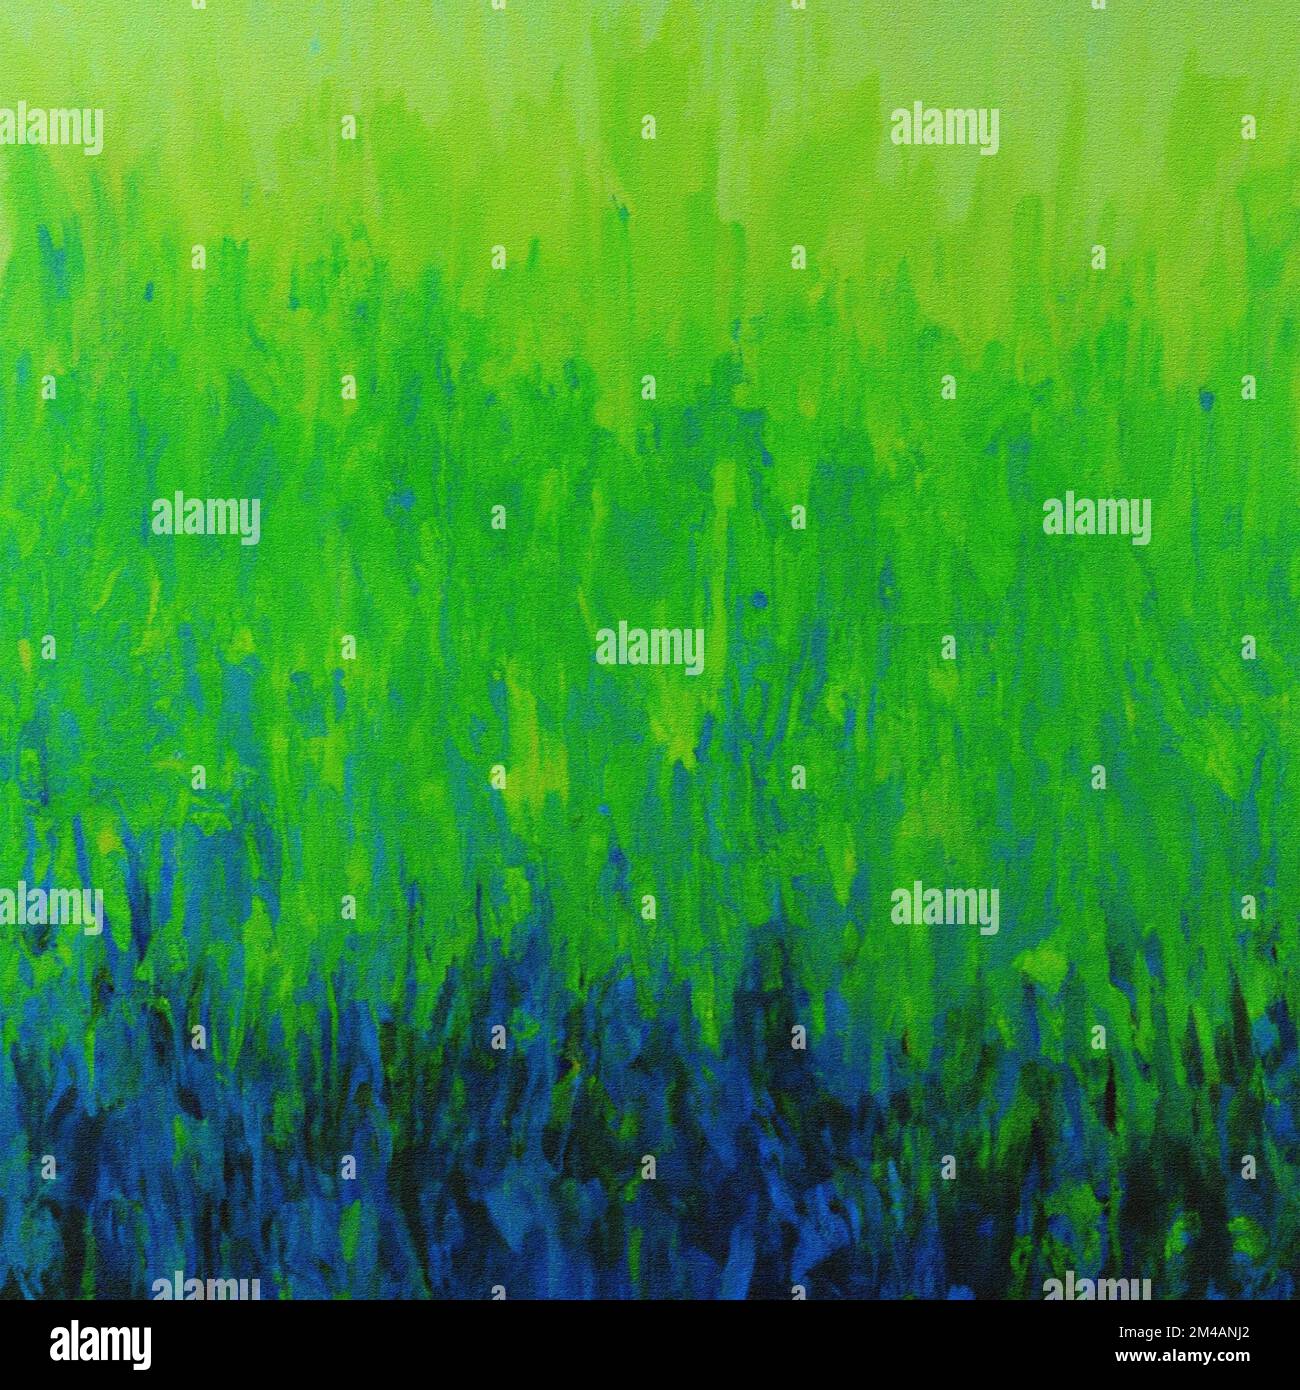 Bright painting of flowers growing in green grassy field created with aquarelle paints as abstract background Stock Photo